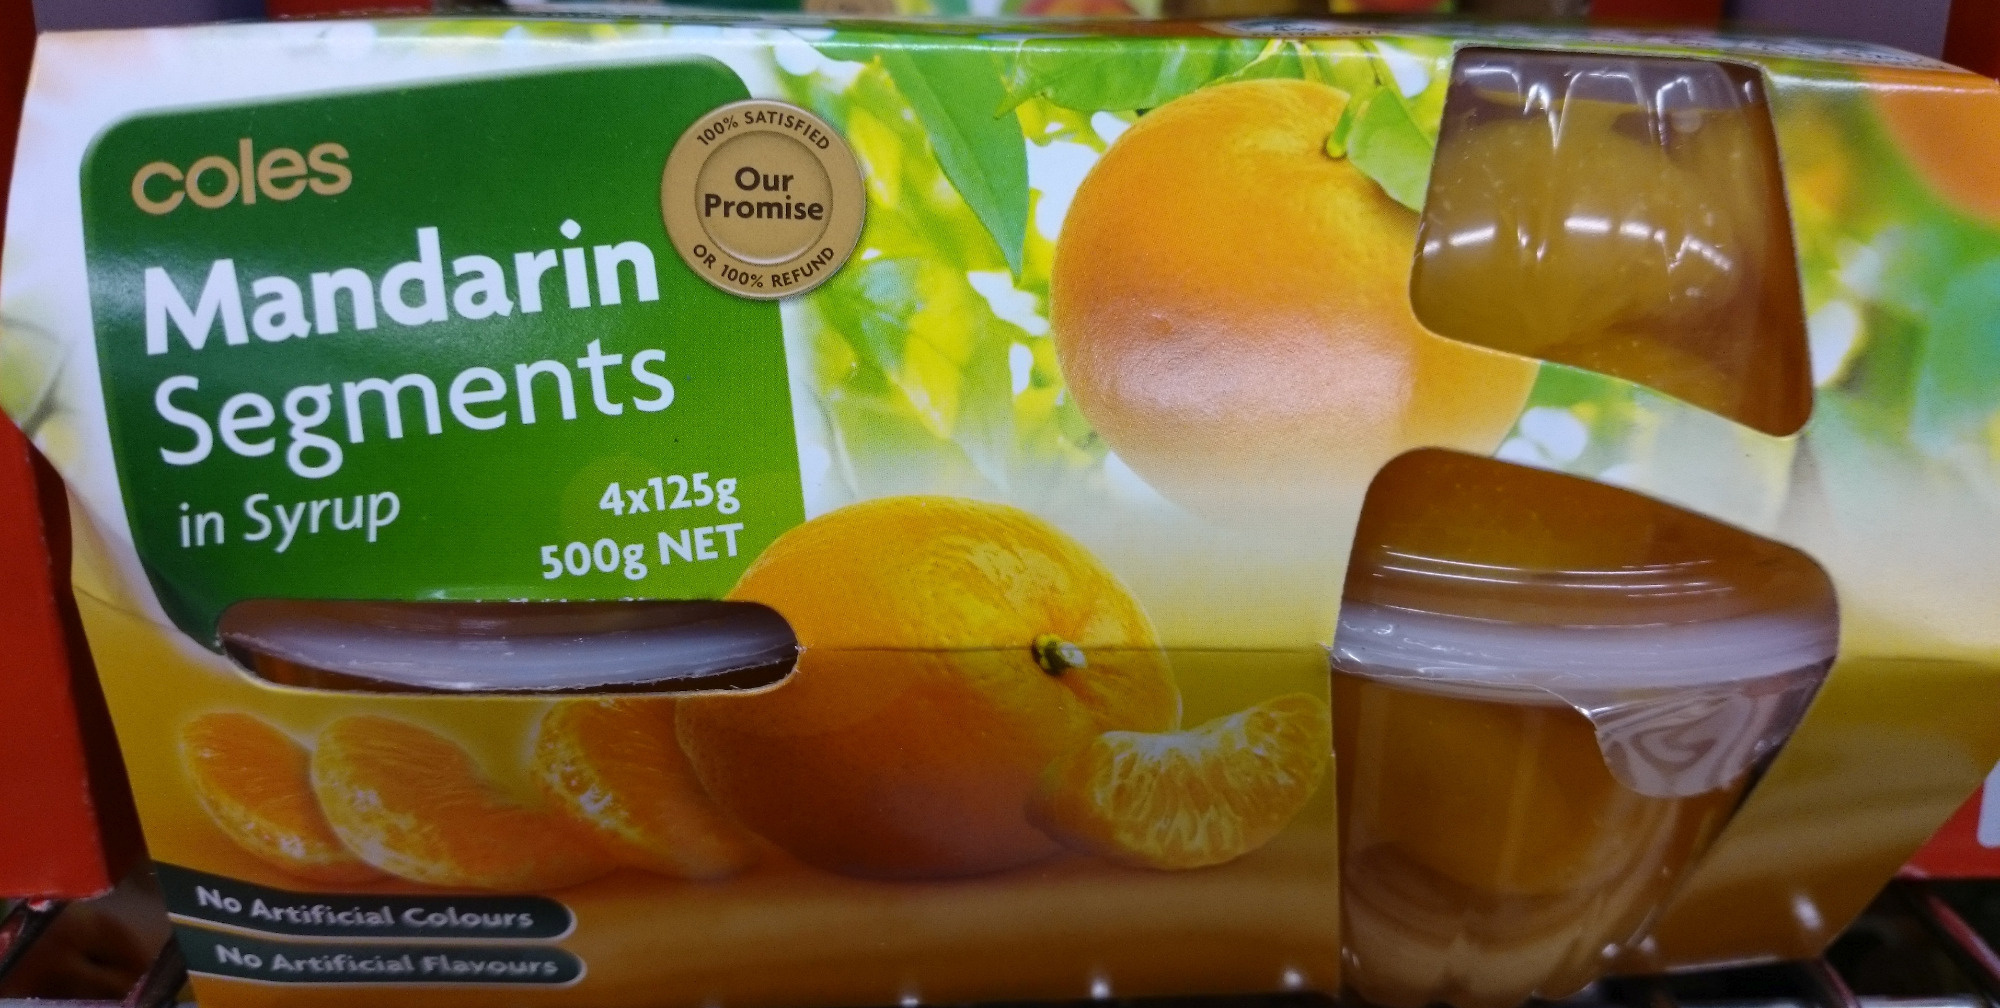 Coles Mandarin Segments in Syrup - Product